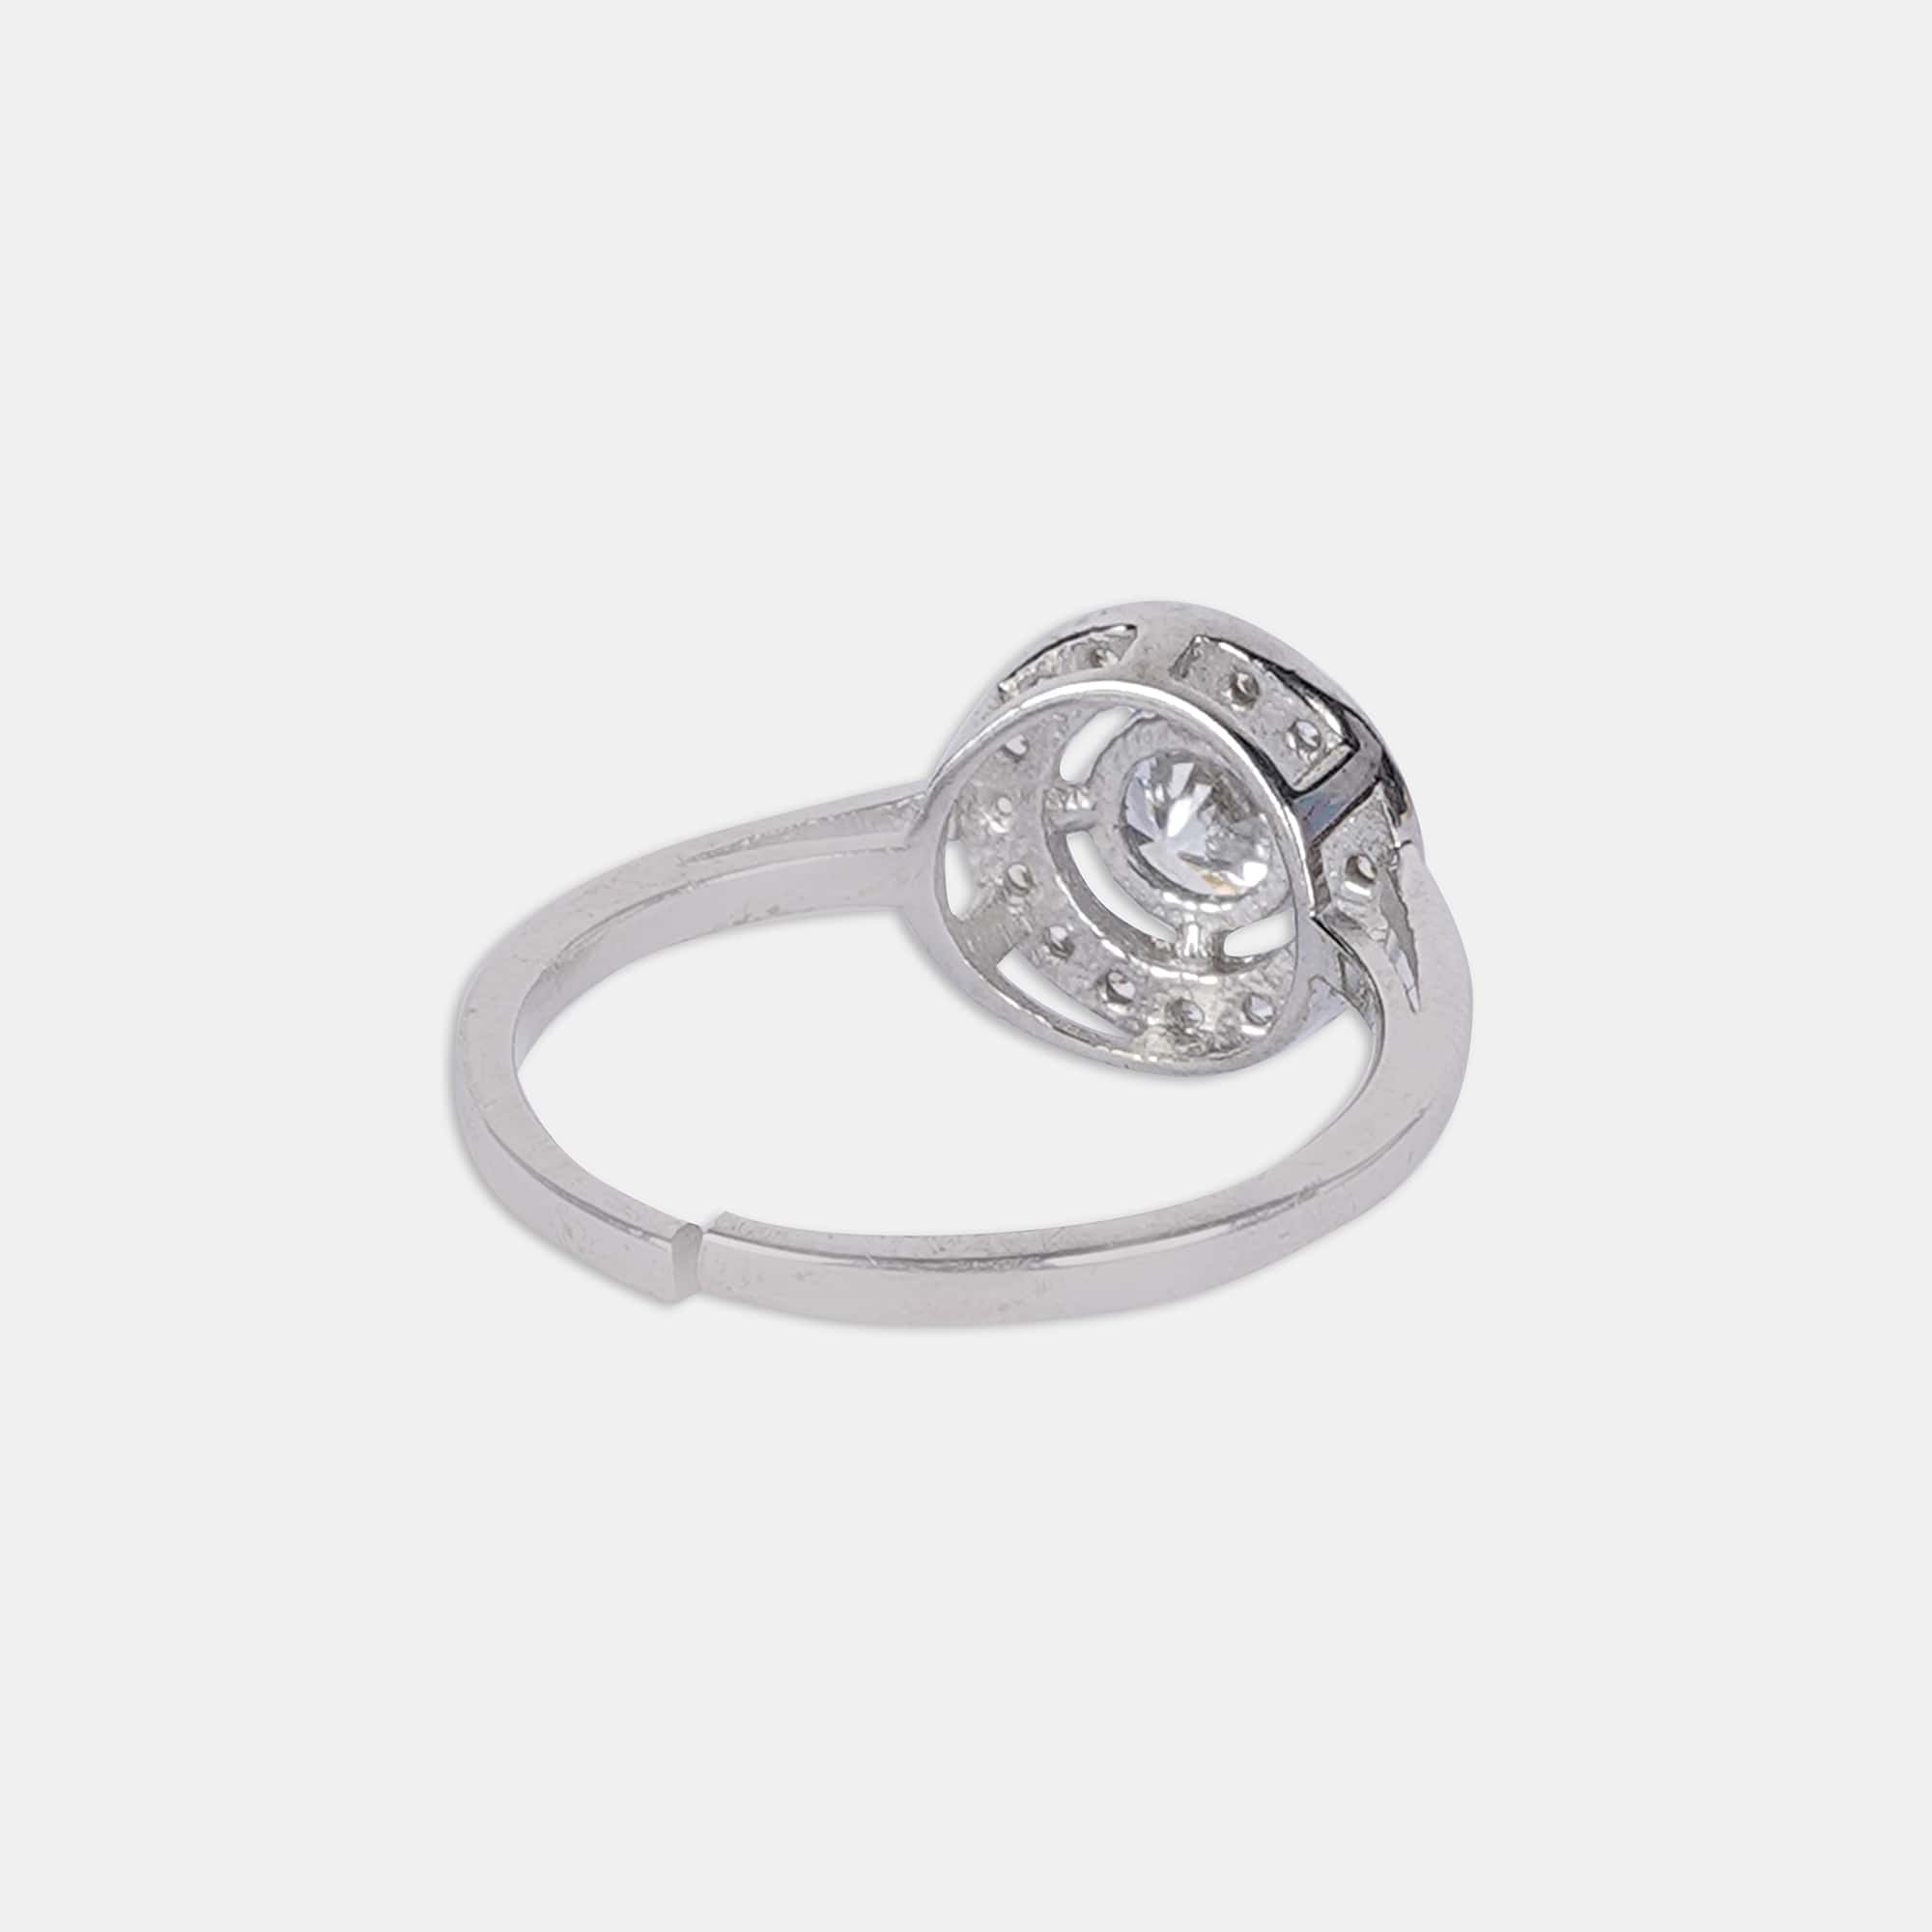 Experience the enchantment of a sterling silver ring, gleaming against a flawless white canvas, emanating everlasting charm.